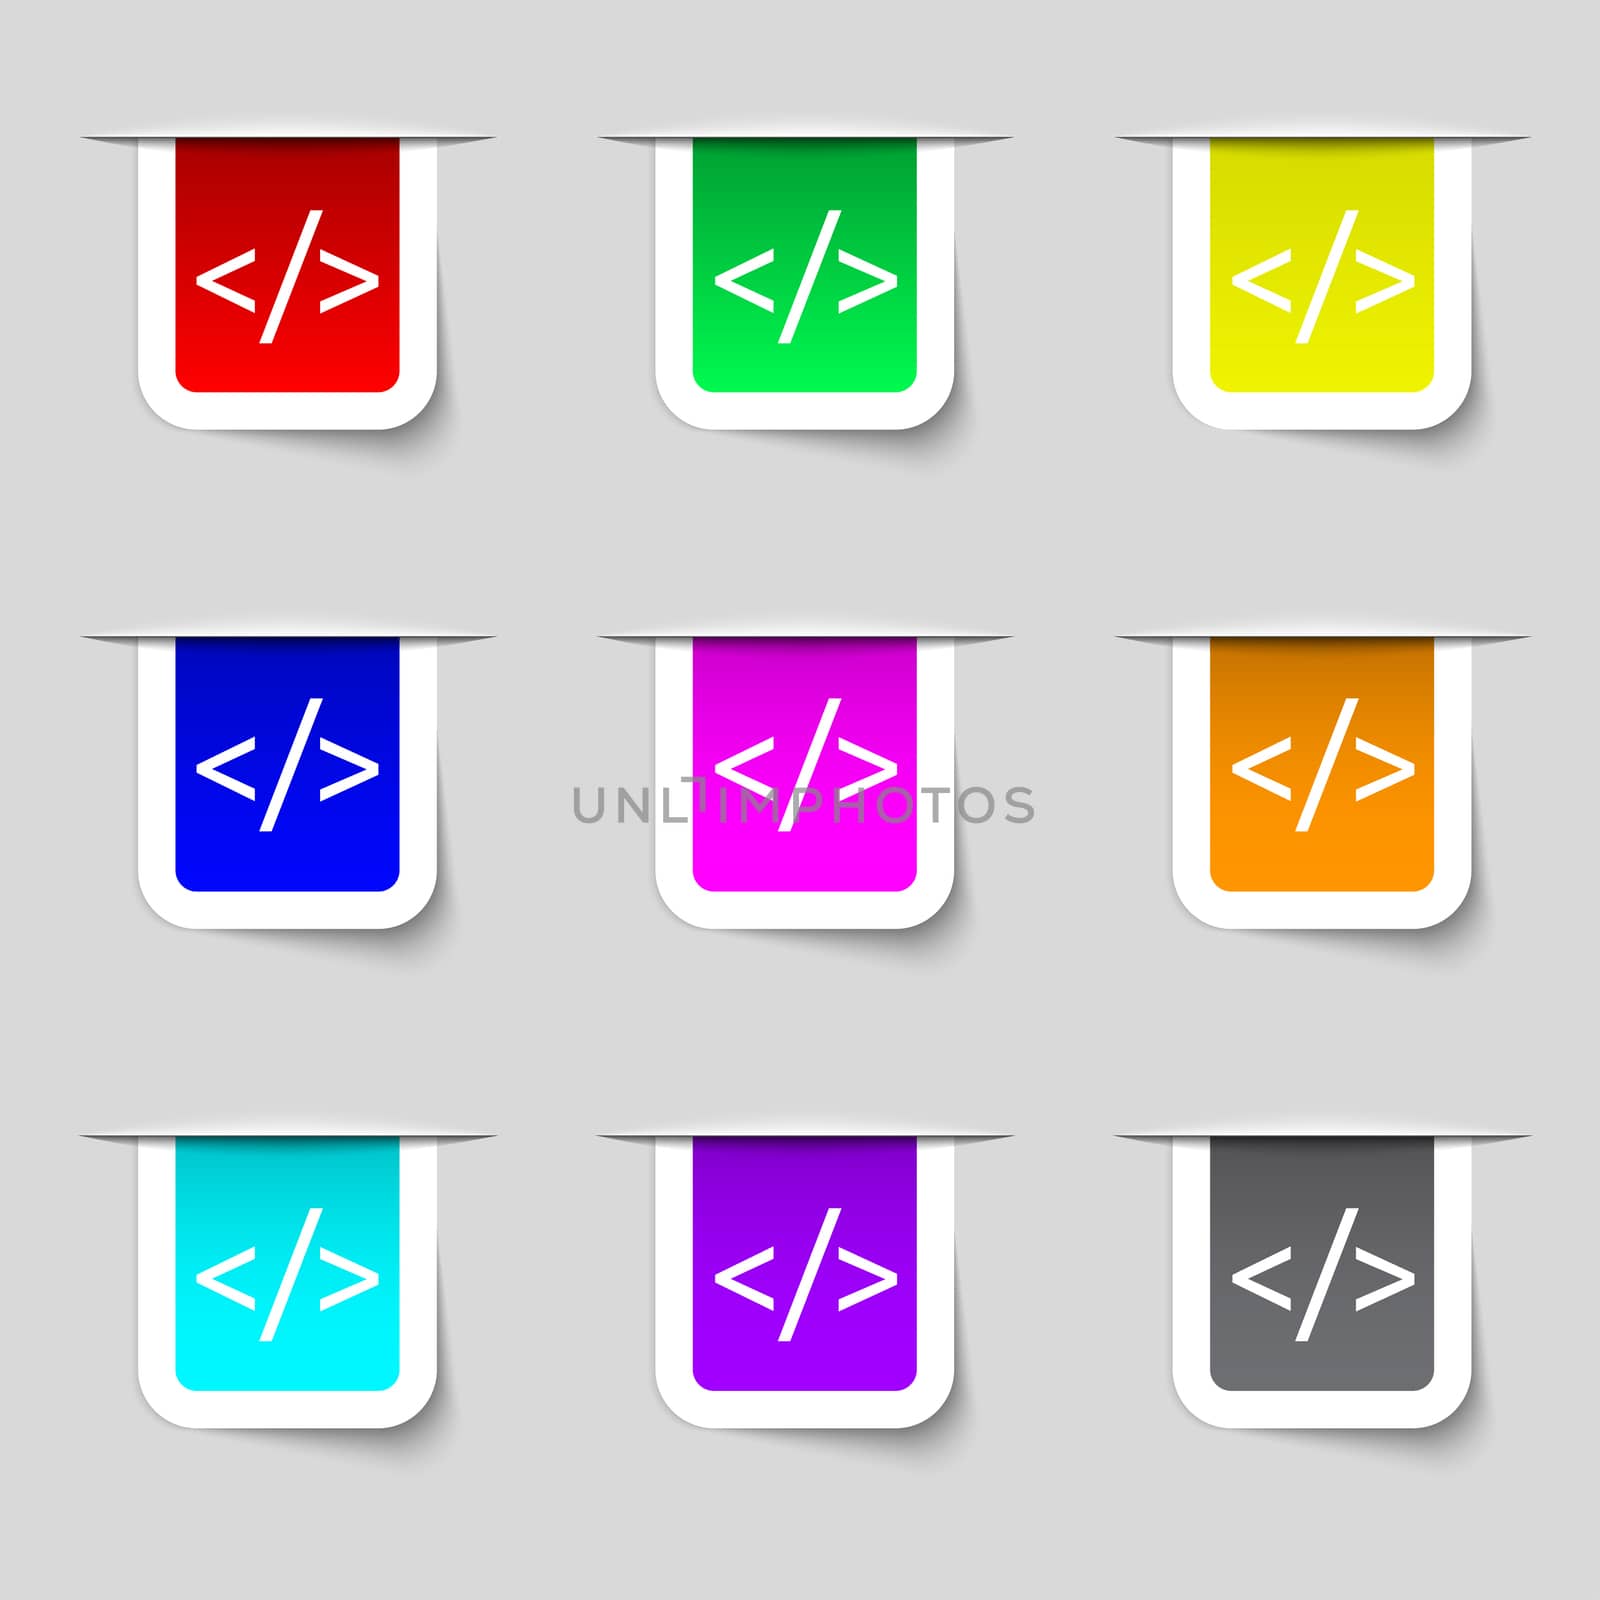 Code sign icon. Programming language symbol. Set of colored buttons. illustration